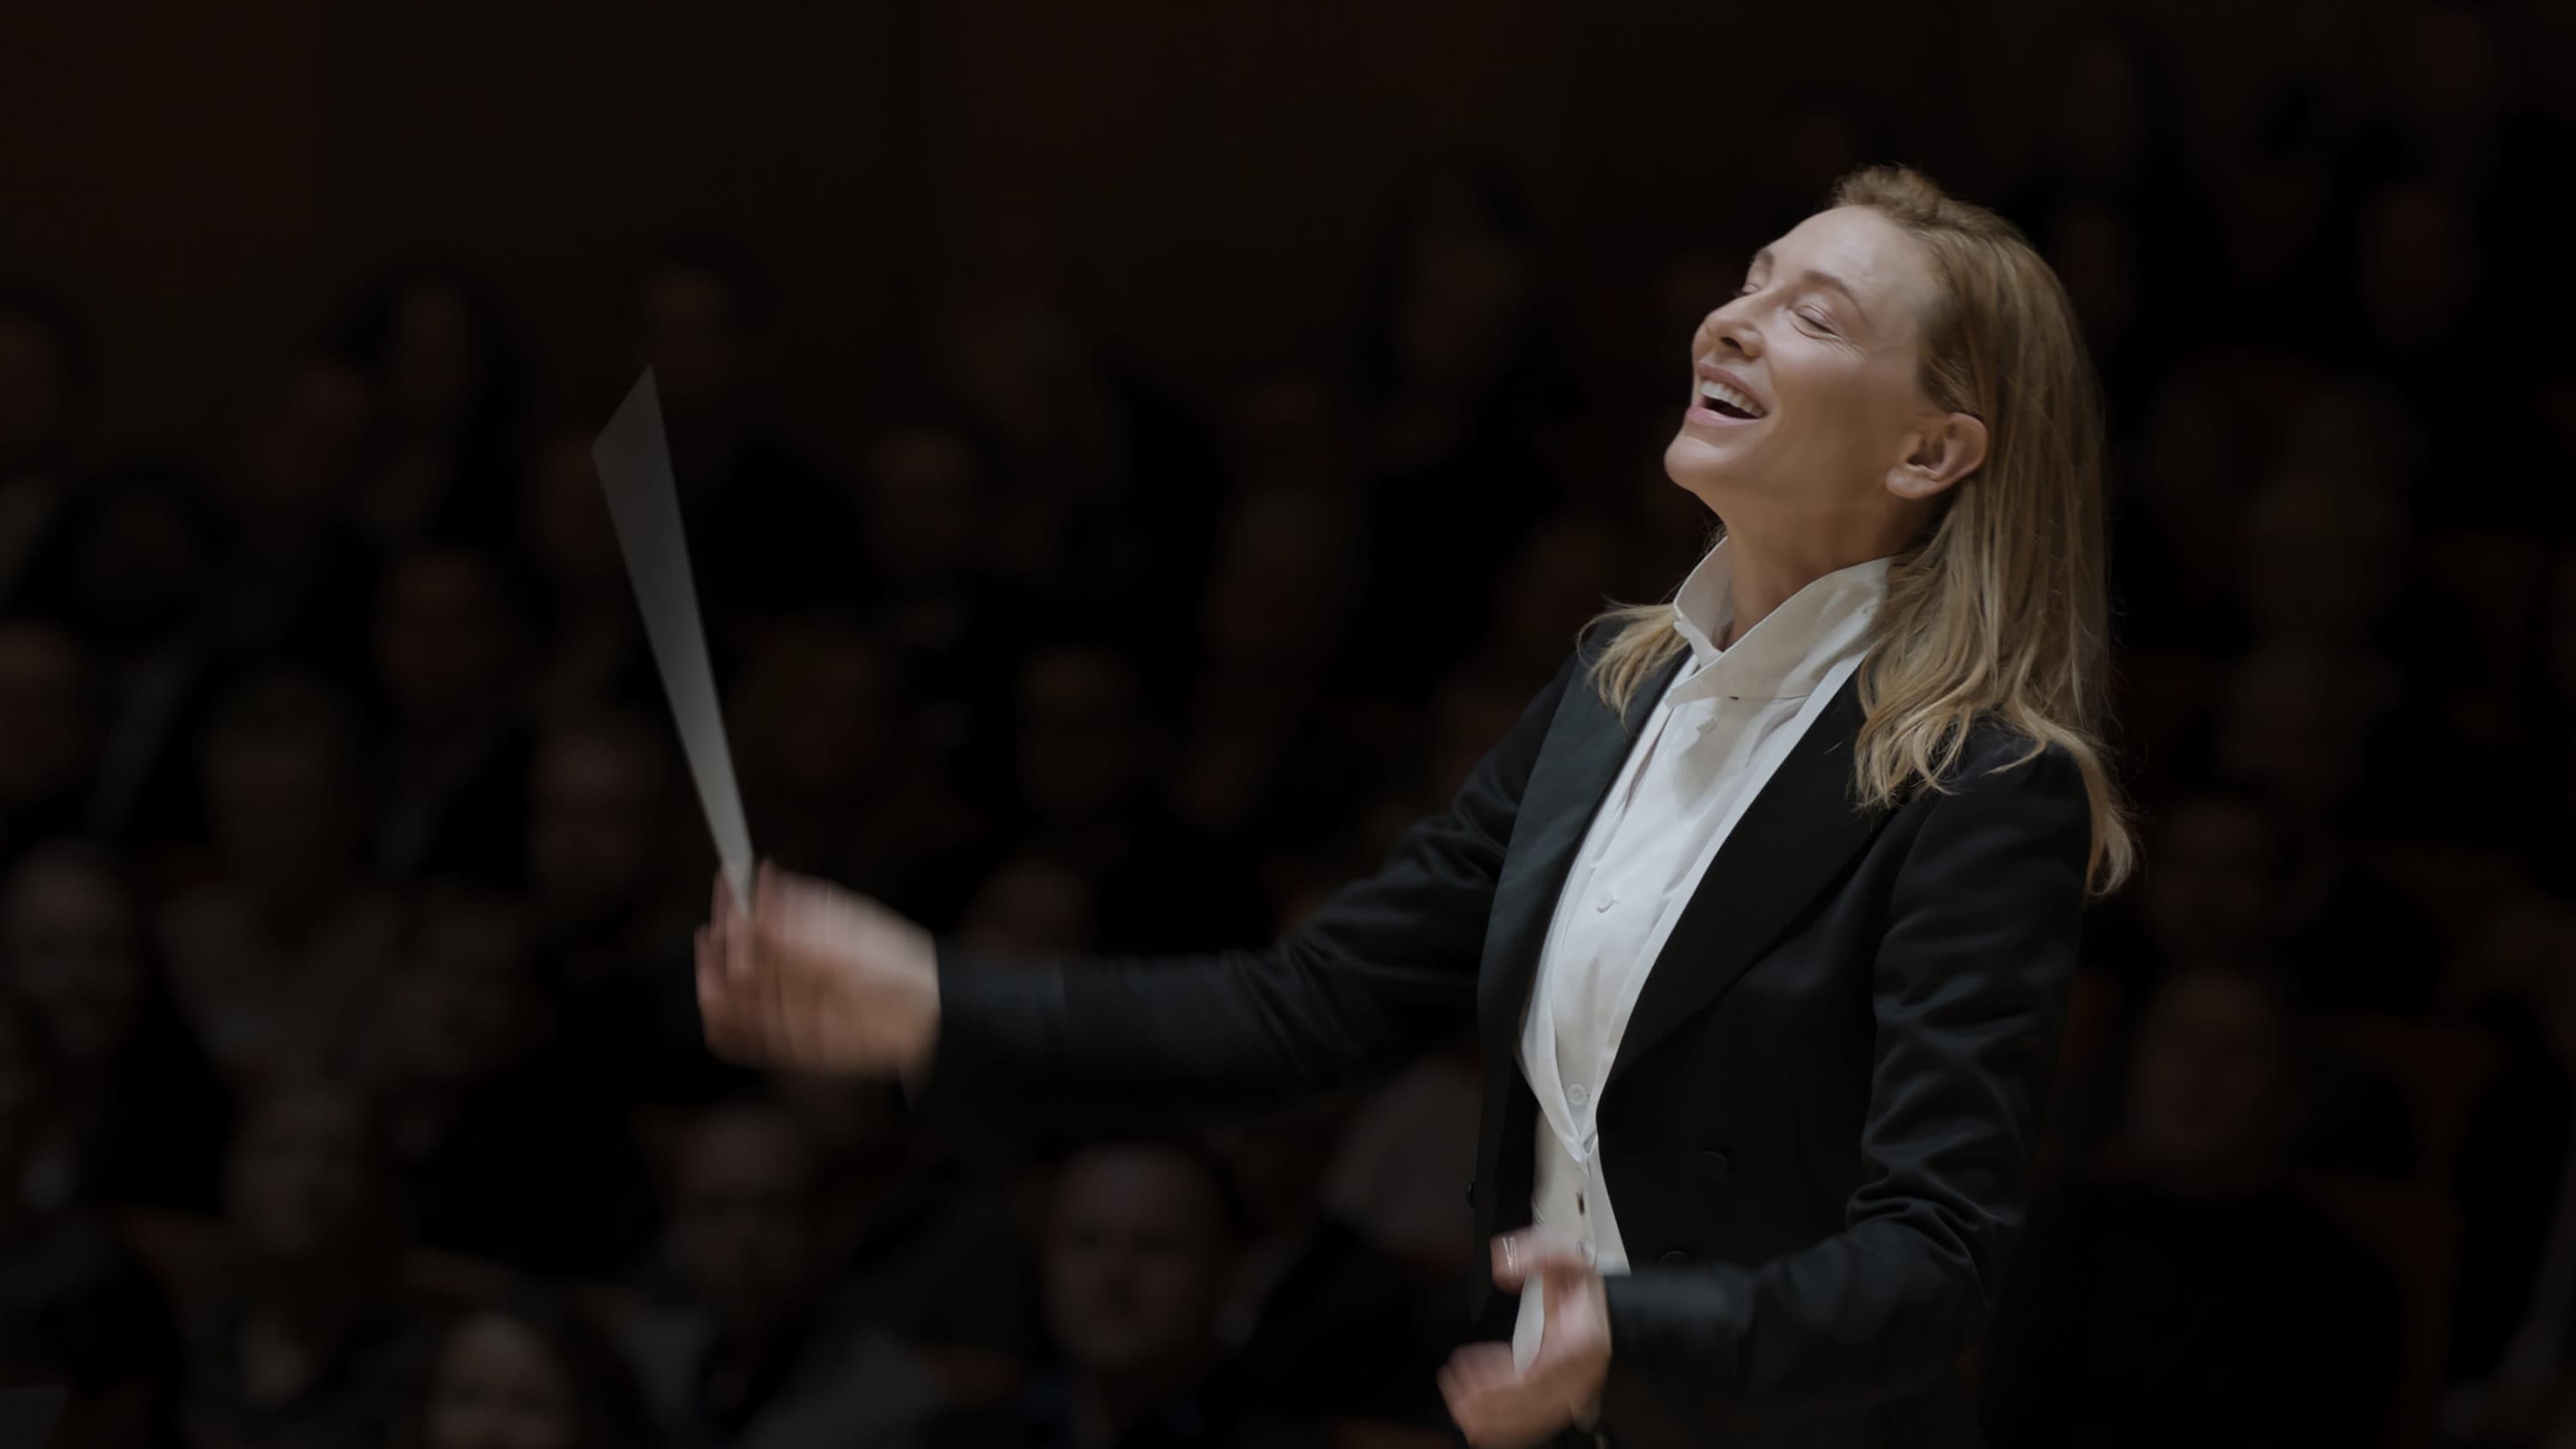 In 'TÁR,' Cate Blanchett portrays a genius conductor who's off